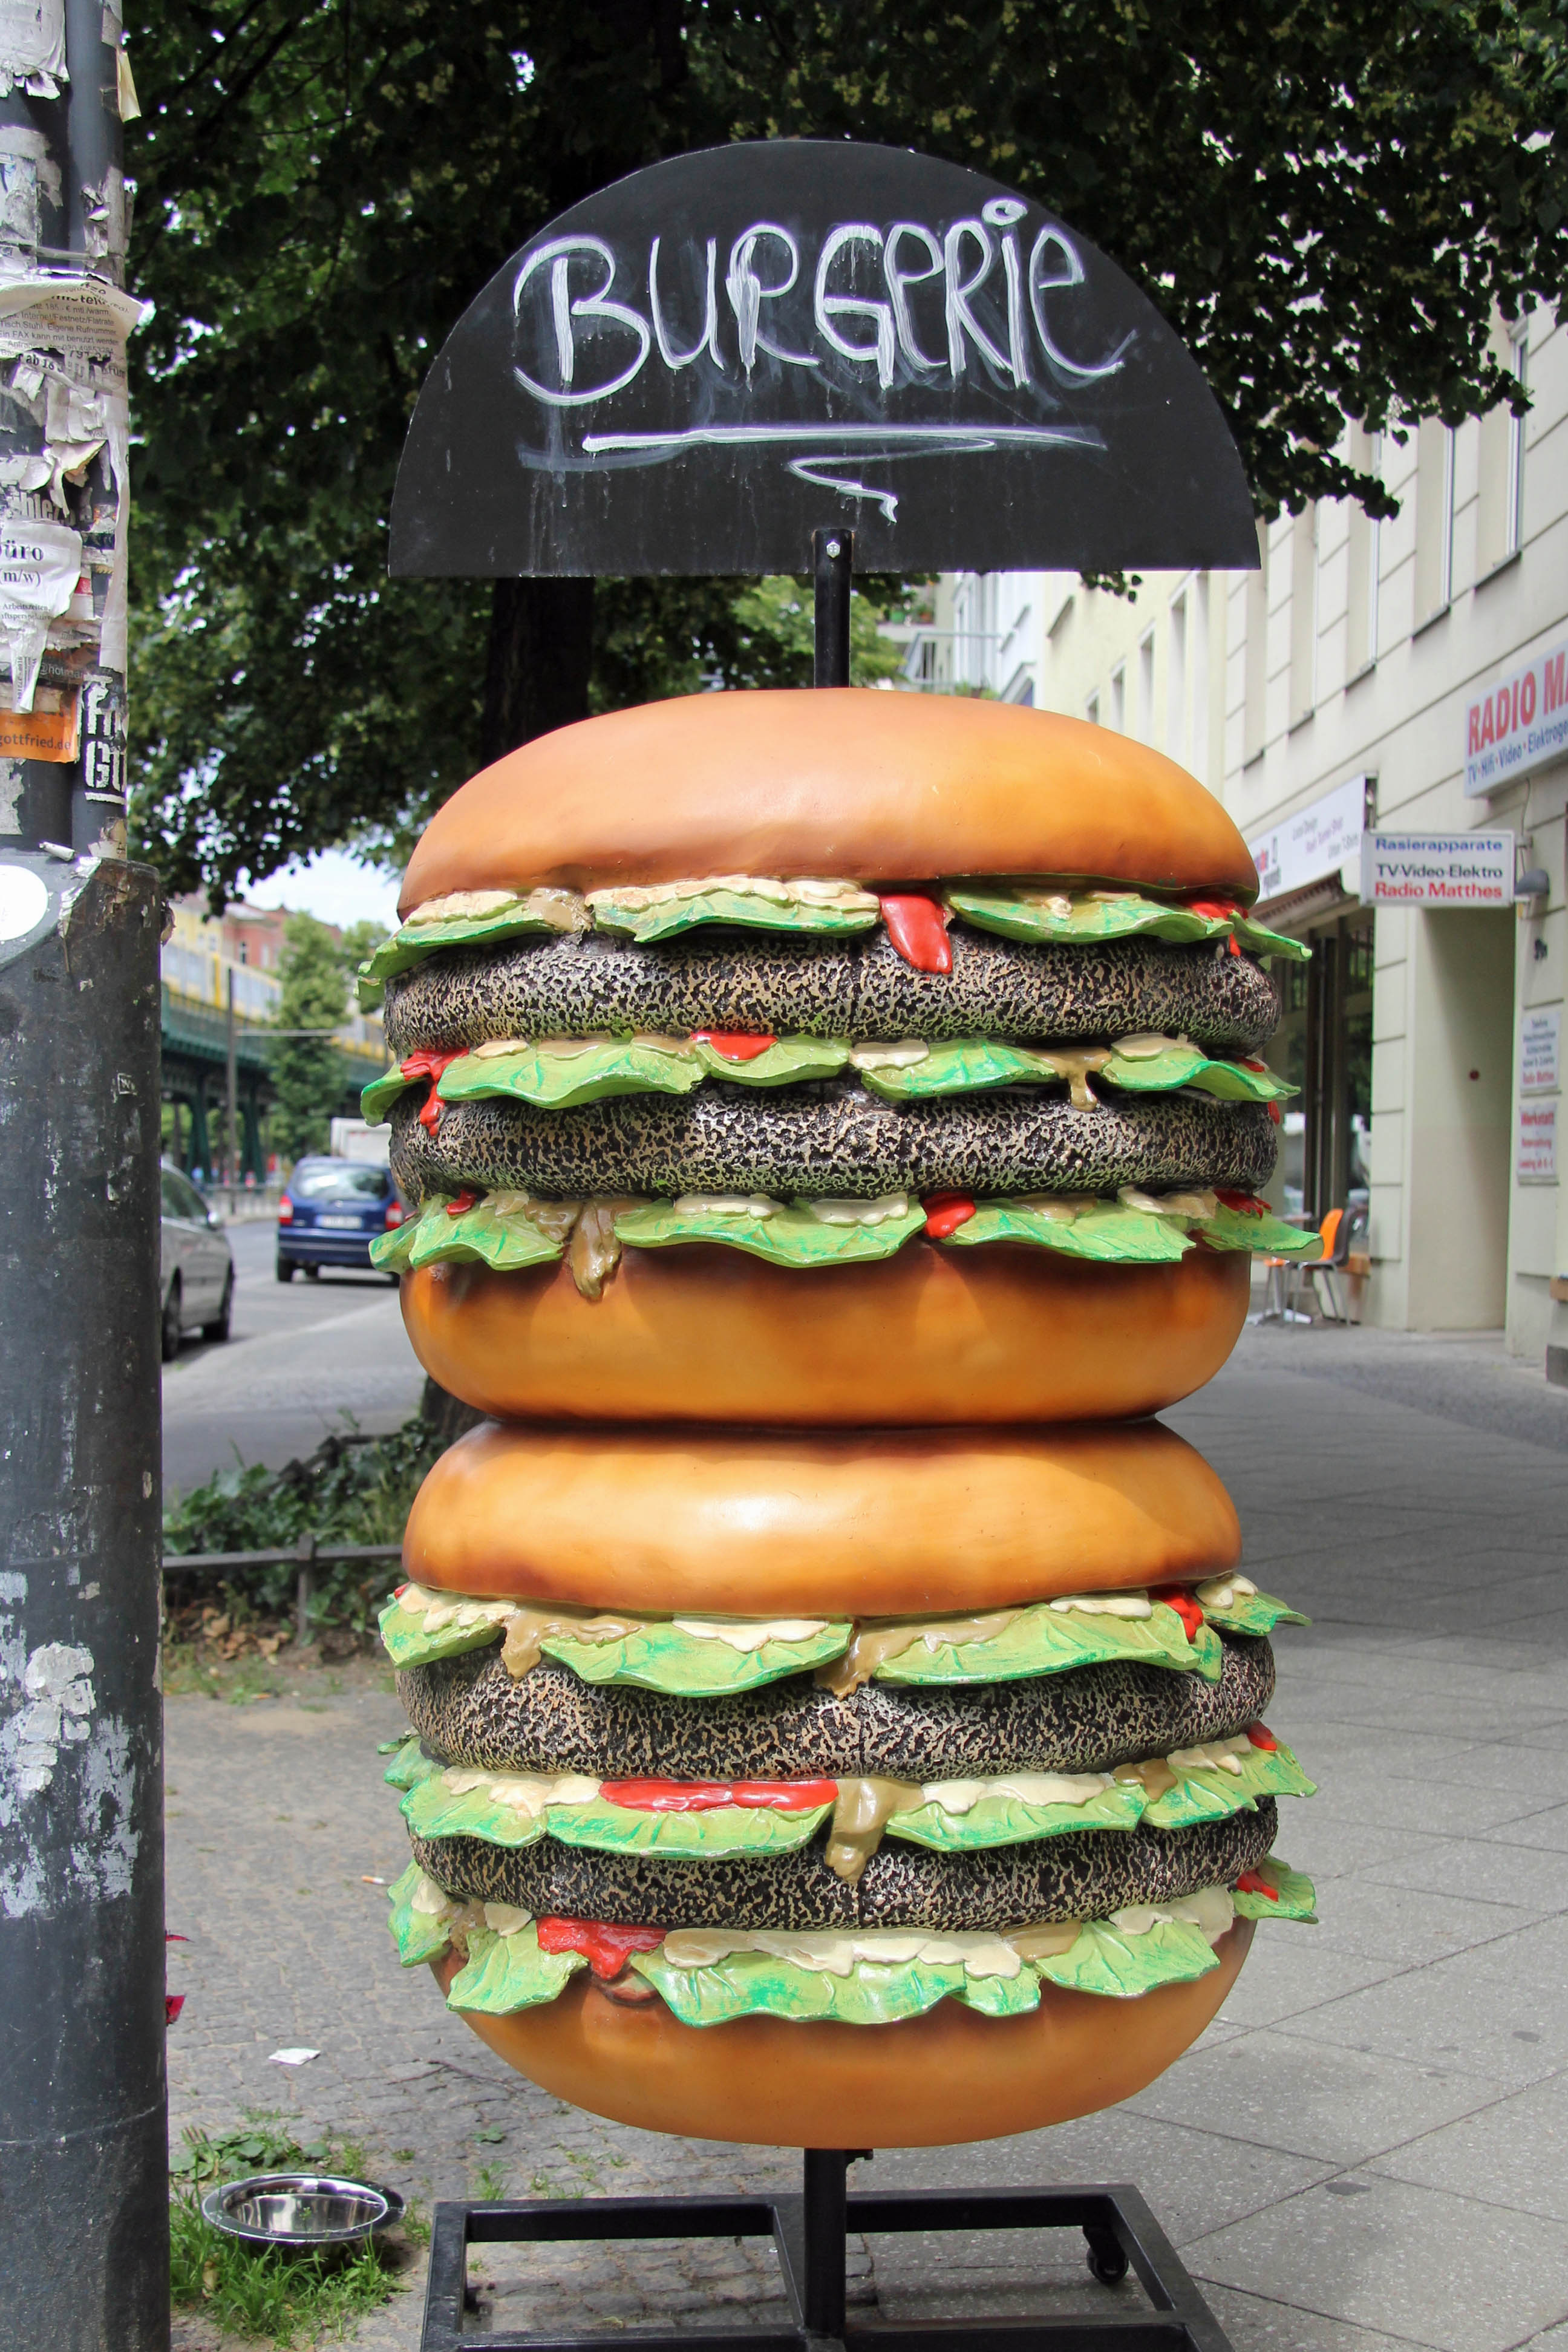 The Burgerie sign - a giant burger stack on the pavement on Schönhauser Allee in Berlin